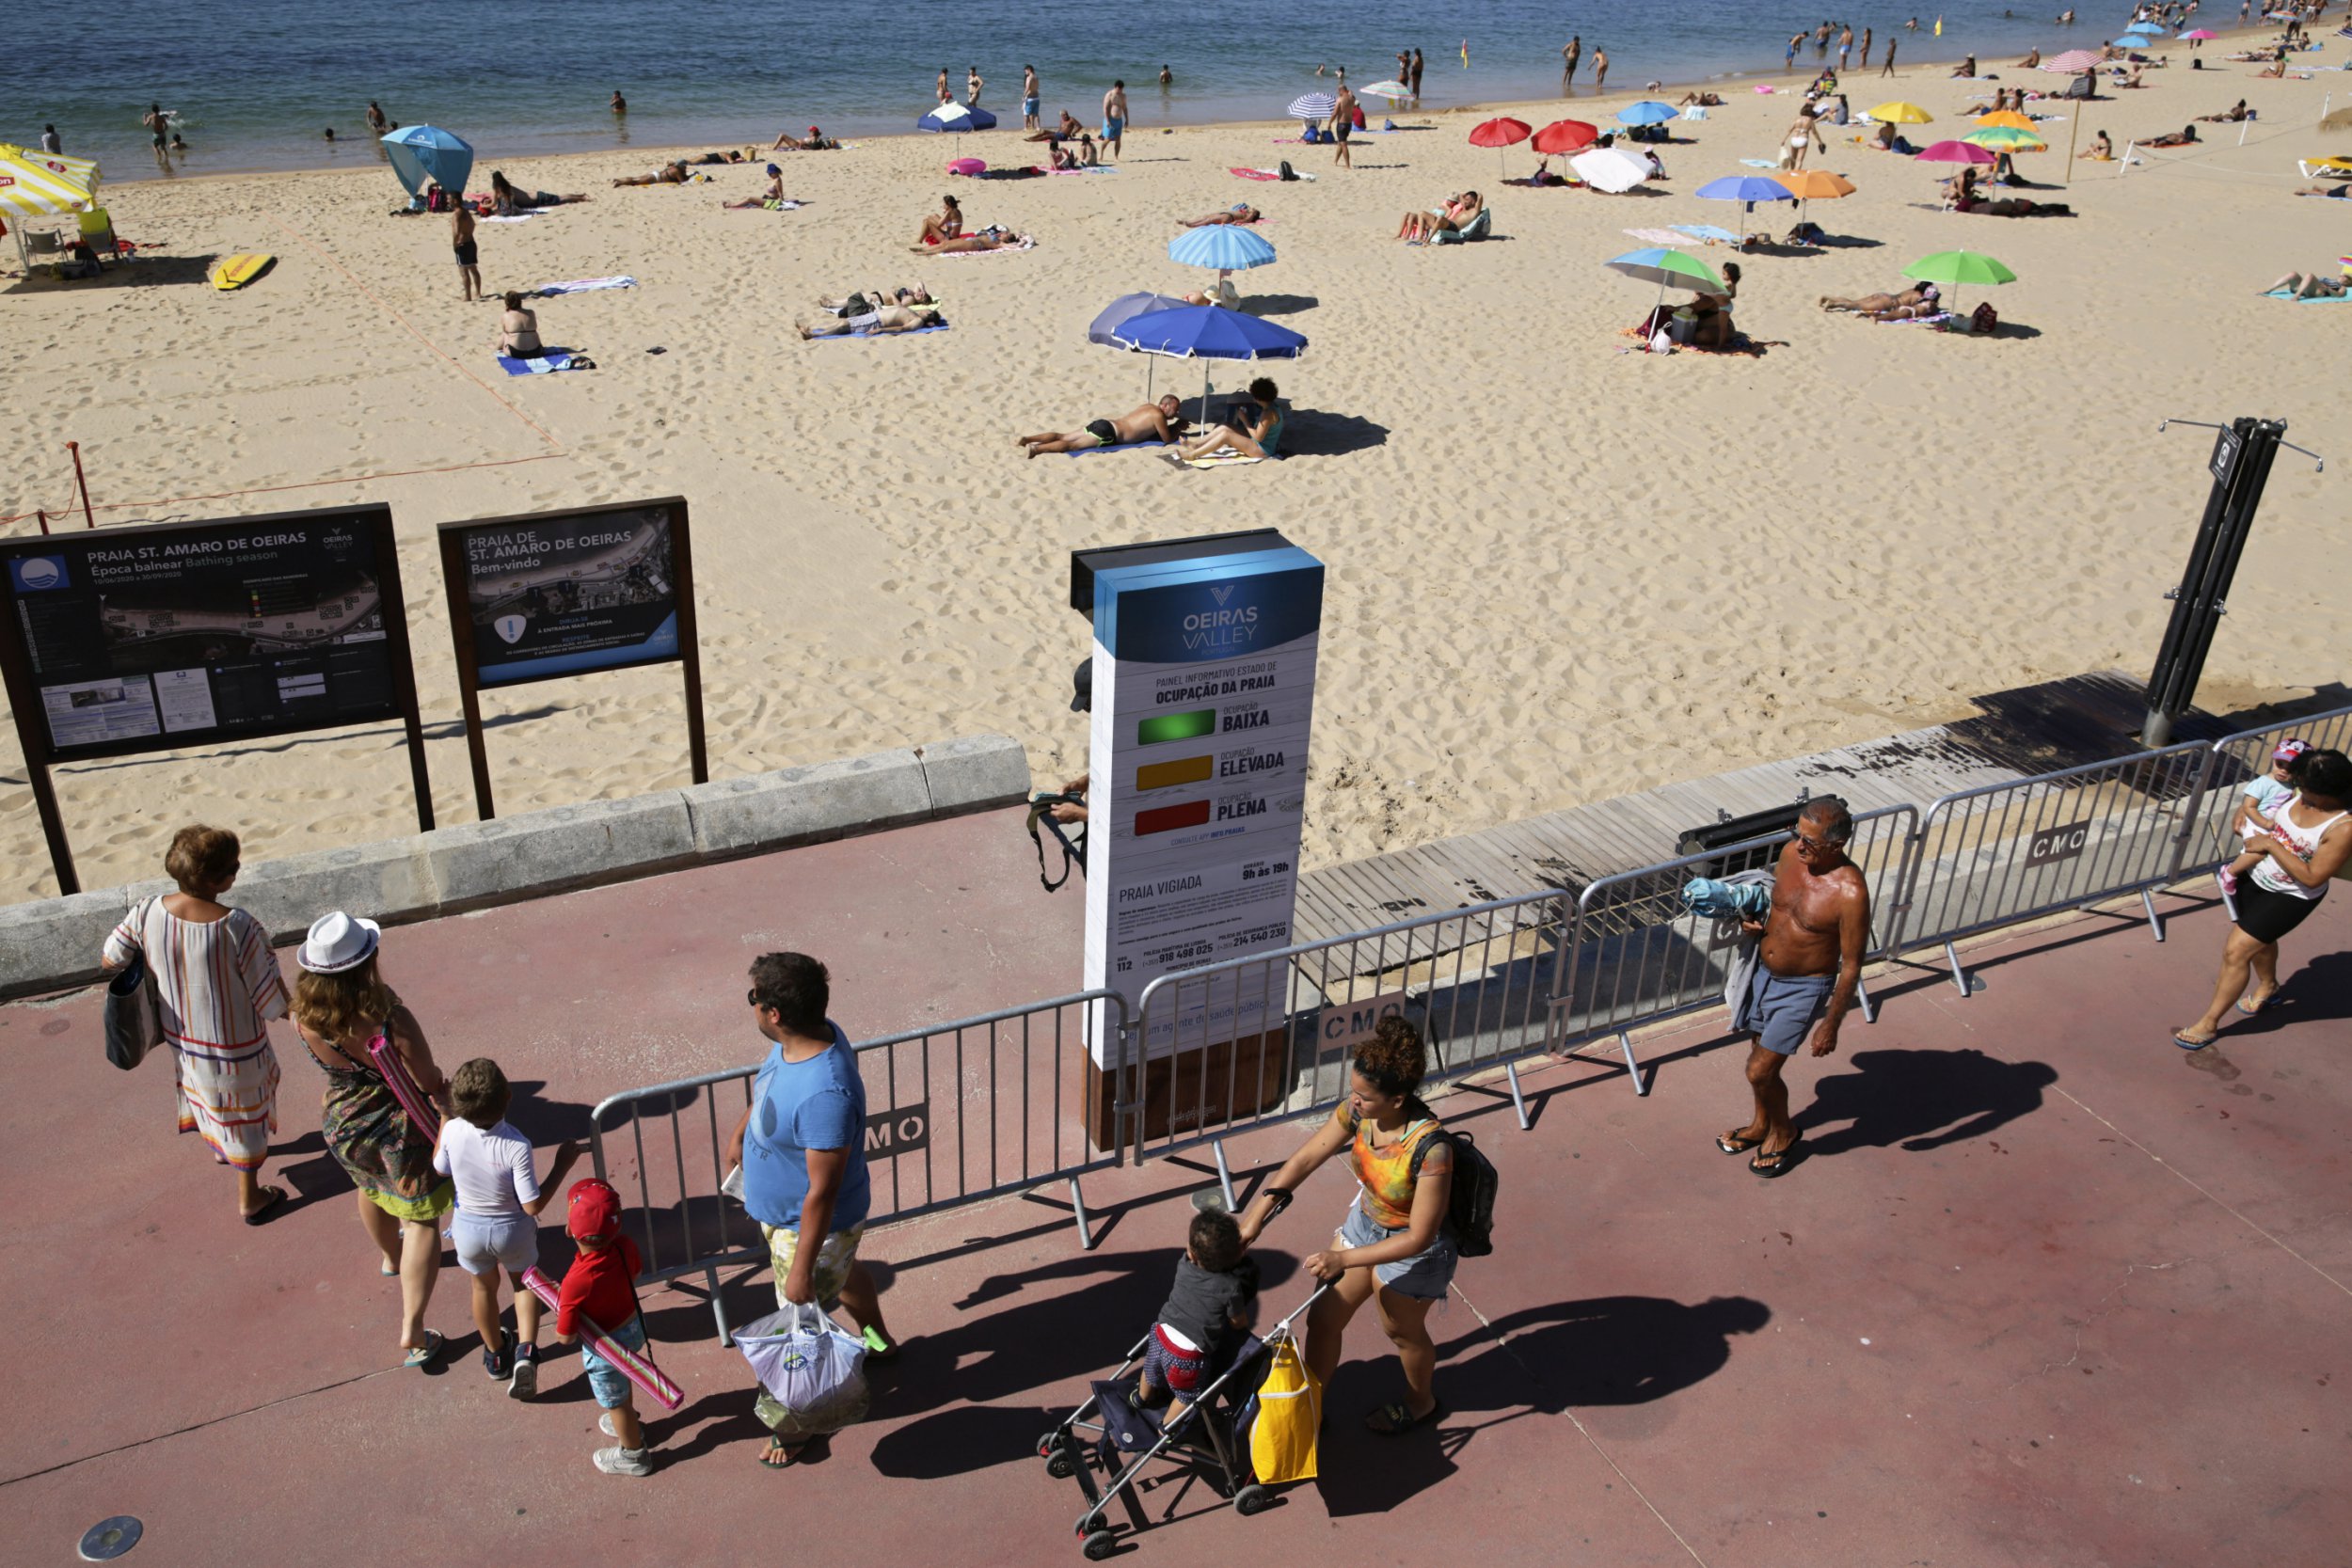 People arrive at the beach walk past a semaphore system that signals how crowded the beach is at any moment, in Oeiras, outside Lisbon, Wednesday, July 15, 2020. The system uses radar to count people entering the gates to the fenced beach to help beachgoers keep social distancing due to the coronavirus pandemic. (AP Photo/Armando Franca)